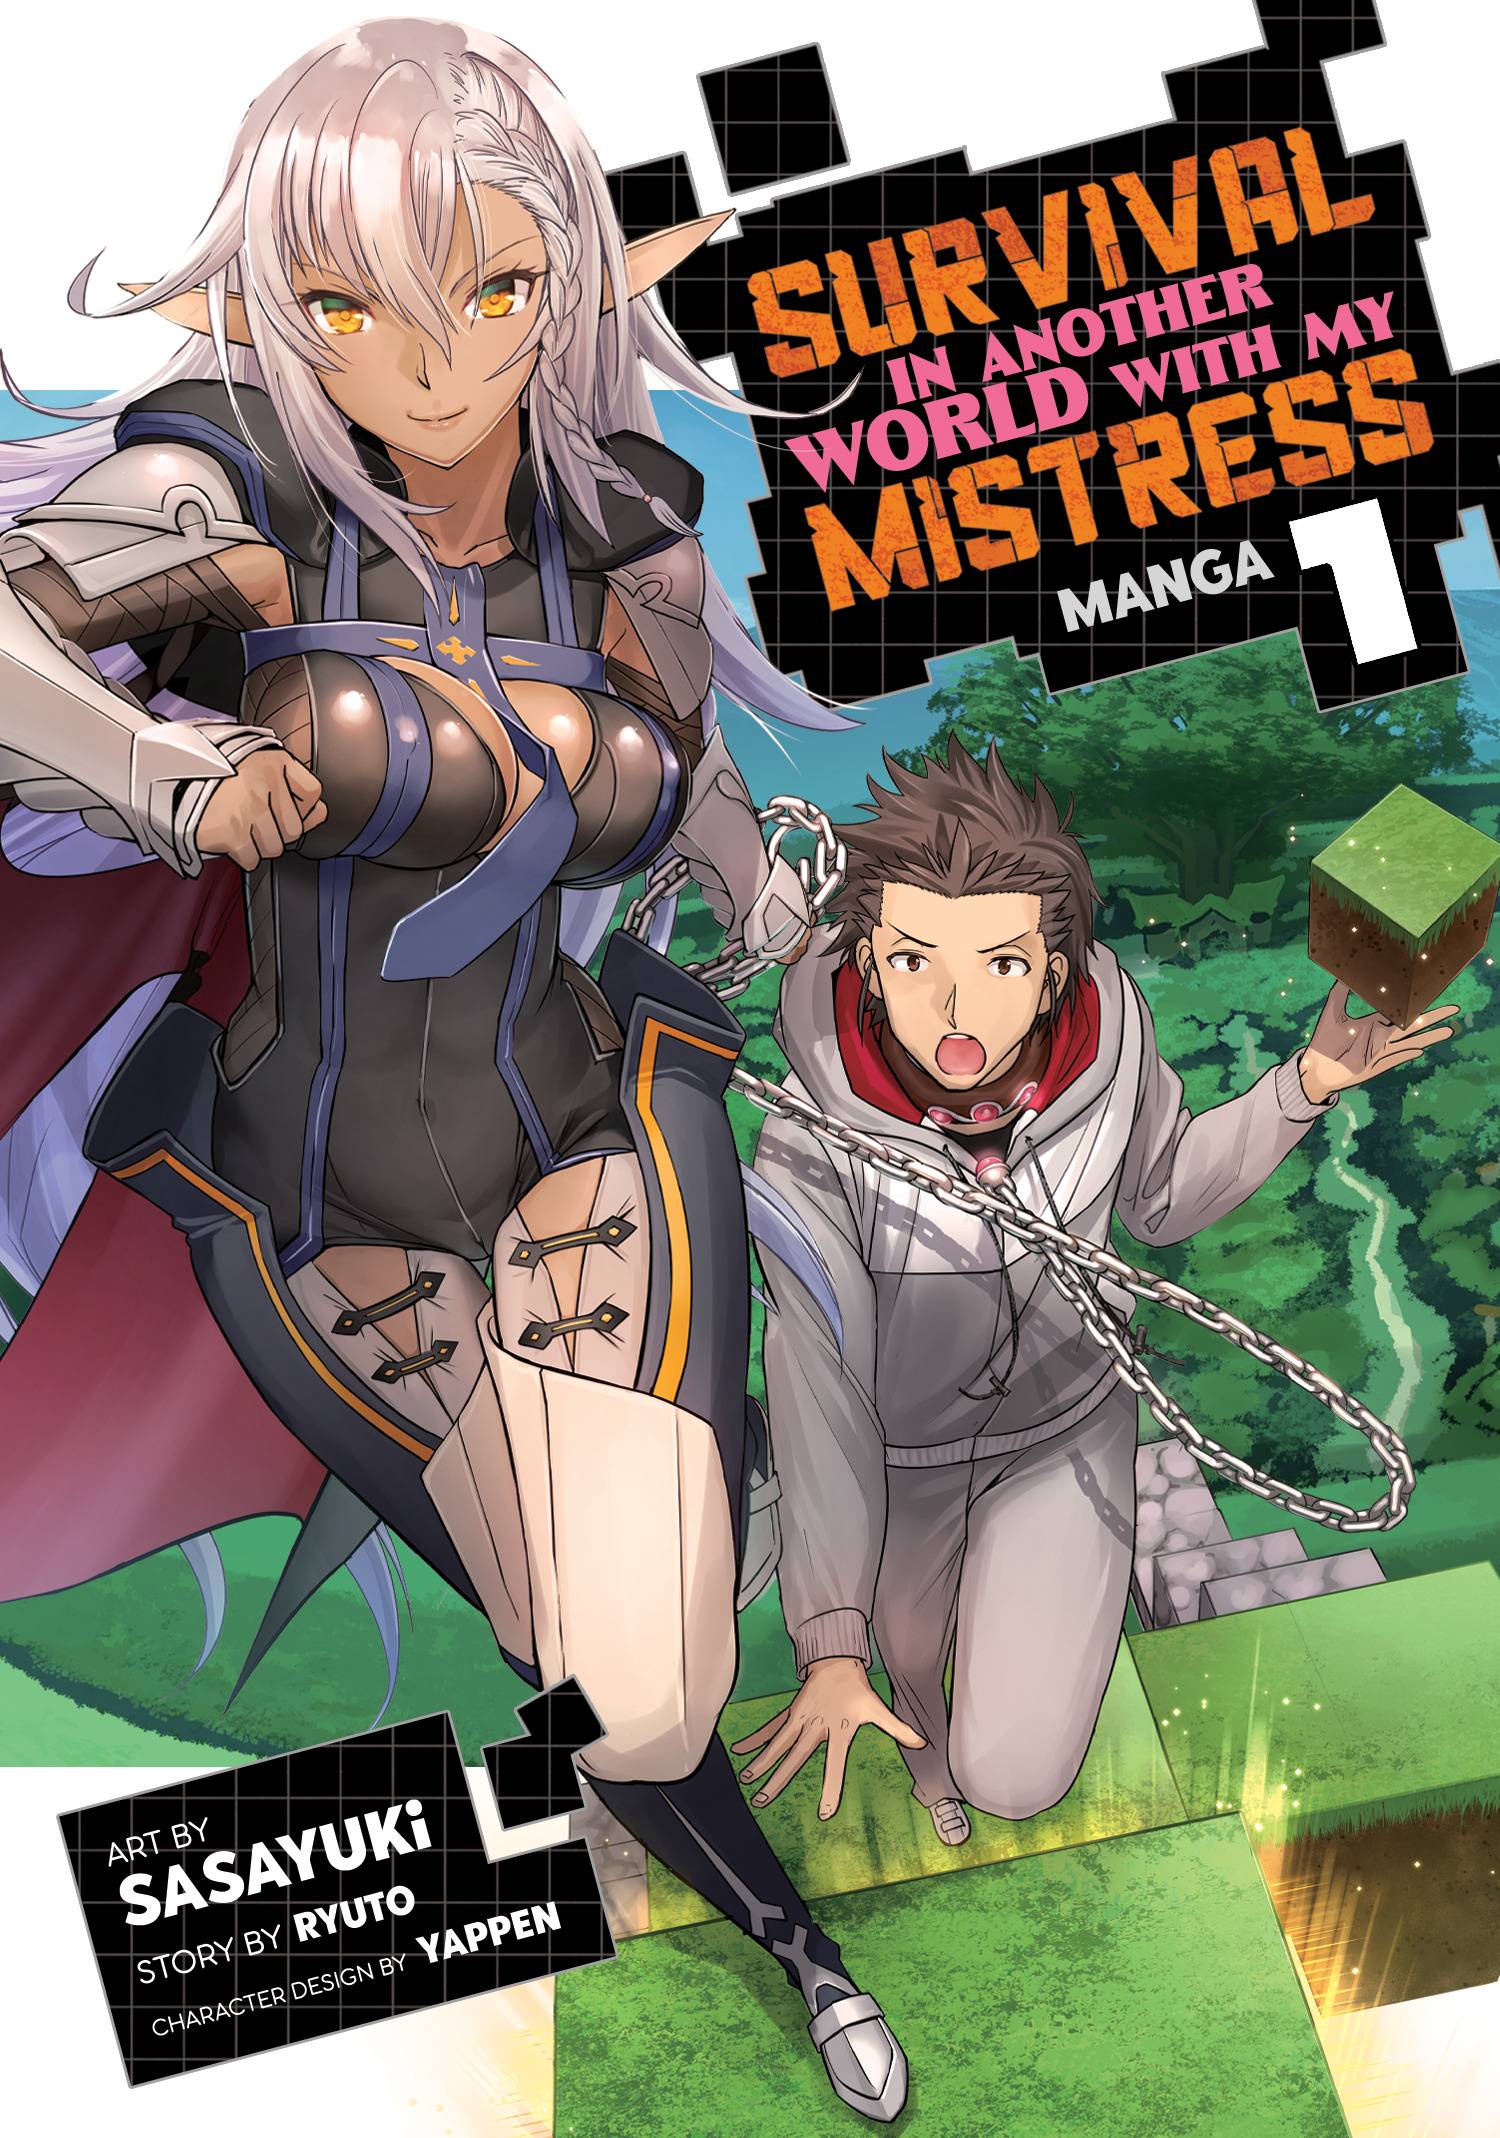 SURVIVAL IN ANOTHER WORLD WITH MY MISTRESS GN VOL 01